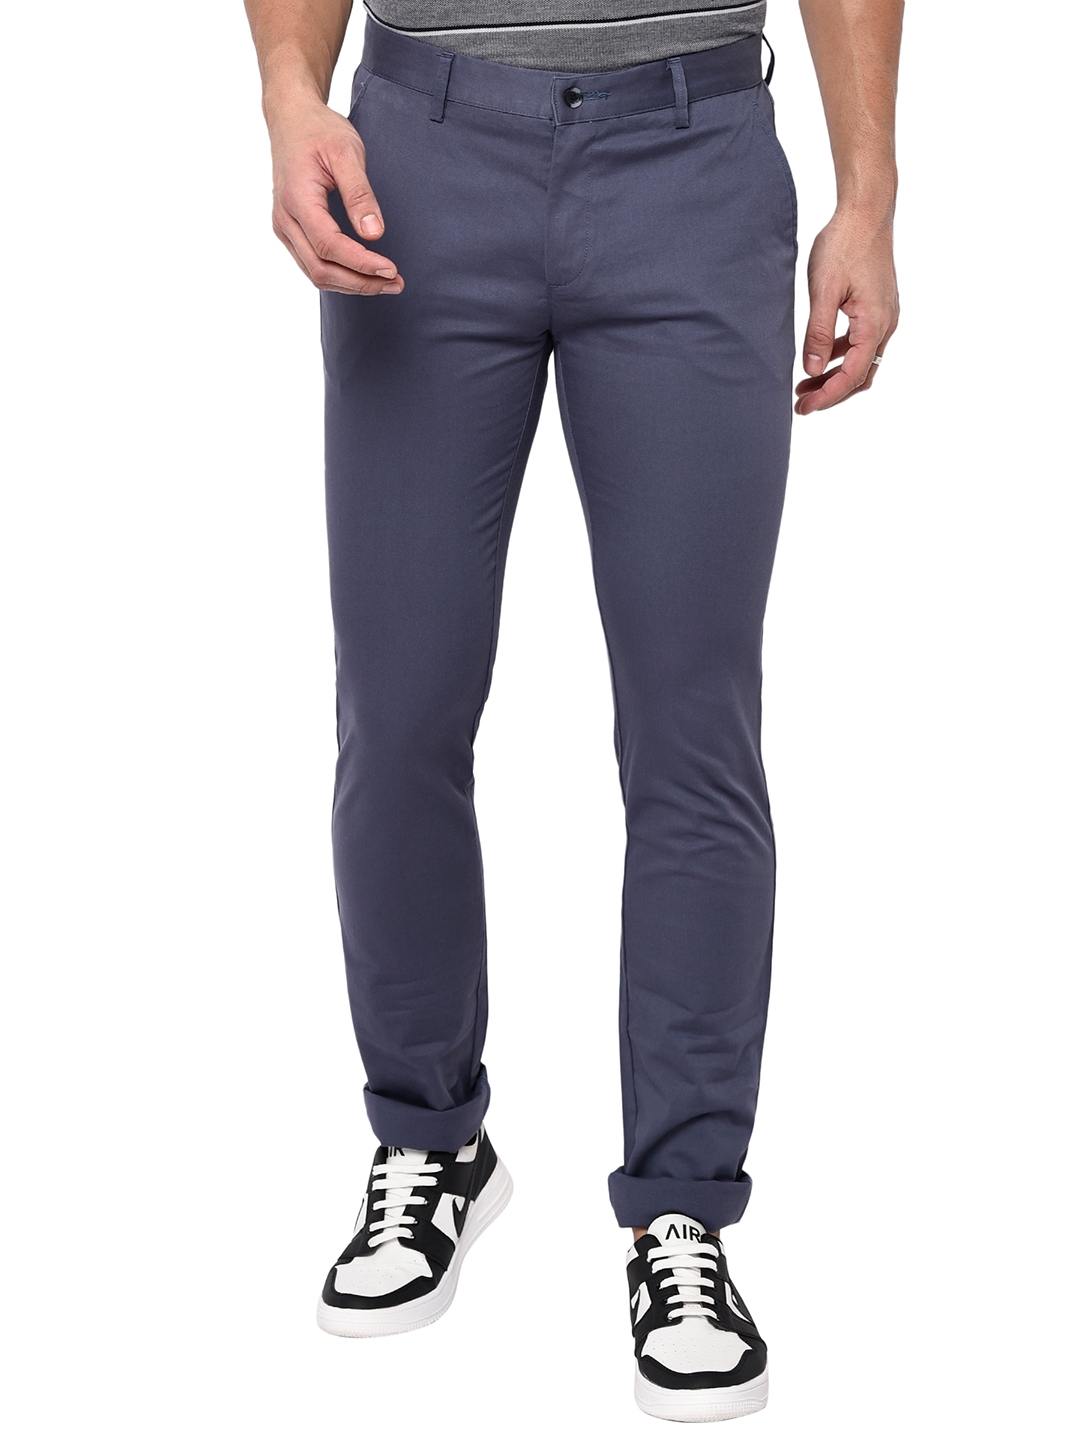 Greenfibre | Blue Washed Slim Fit Casual Trouser | Greenfibre